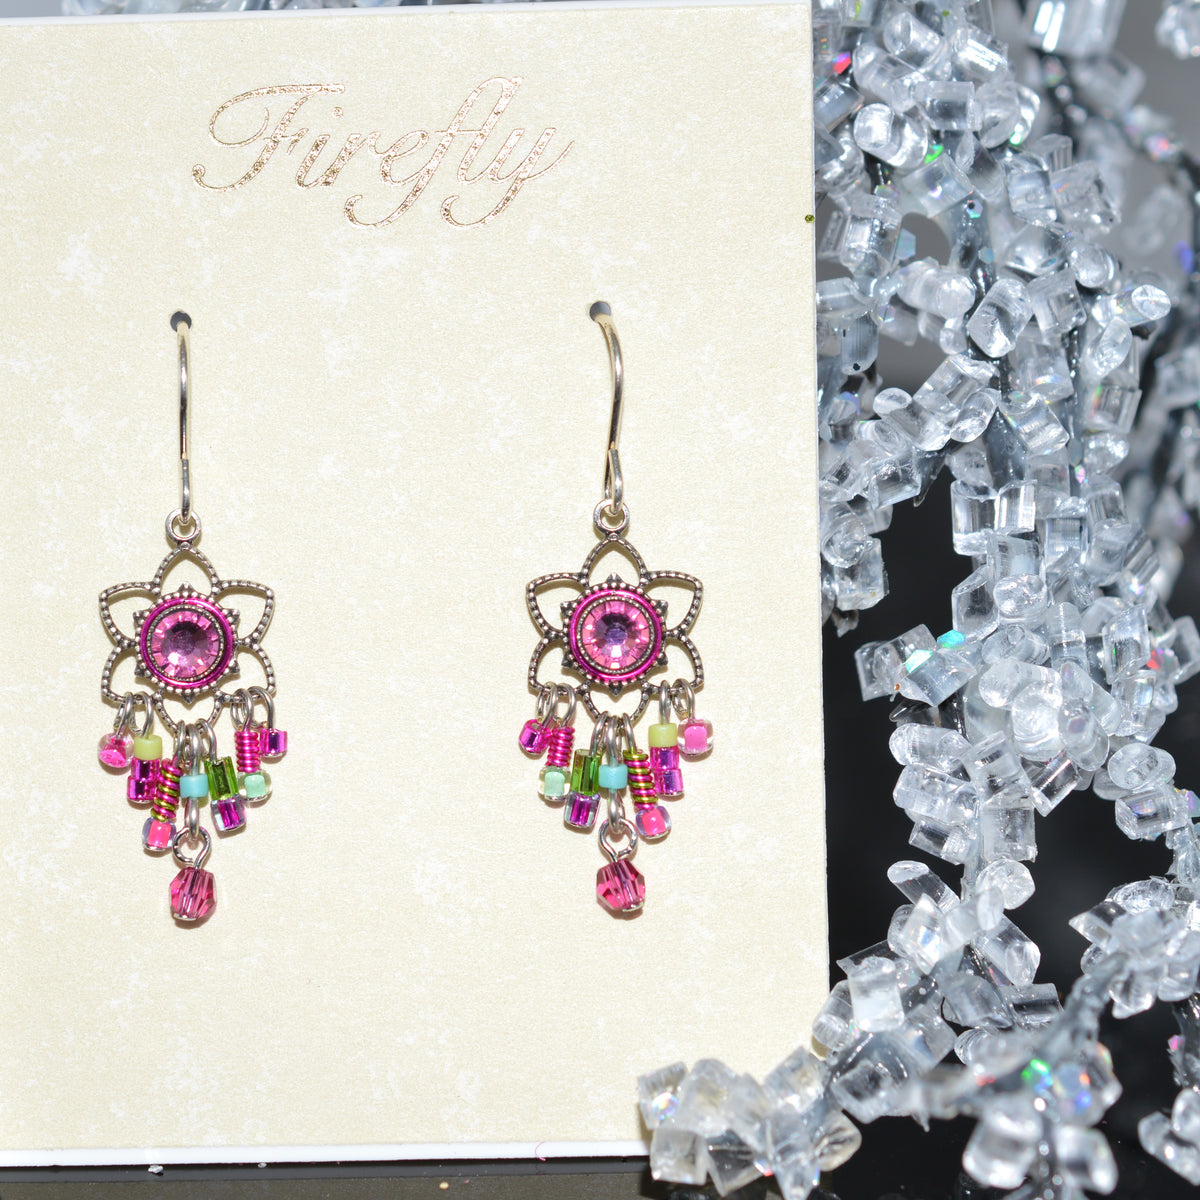 Antique Silver Plated Rose Crystals Chandelier Earrings by Firefly